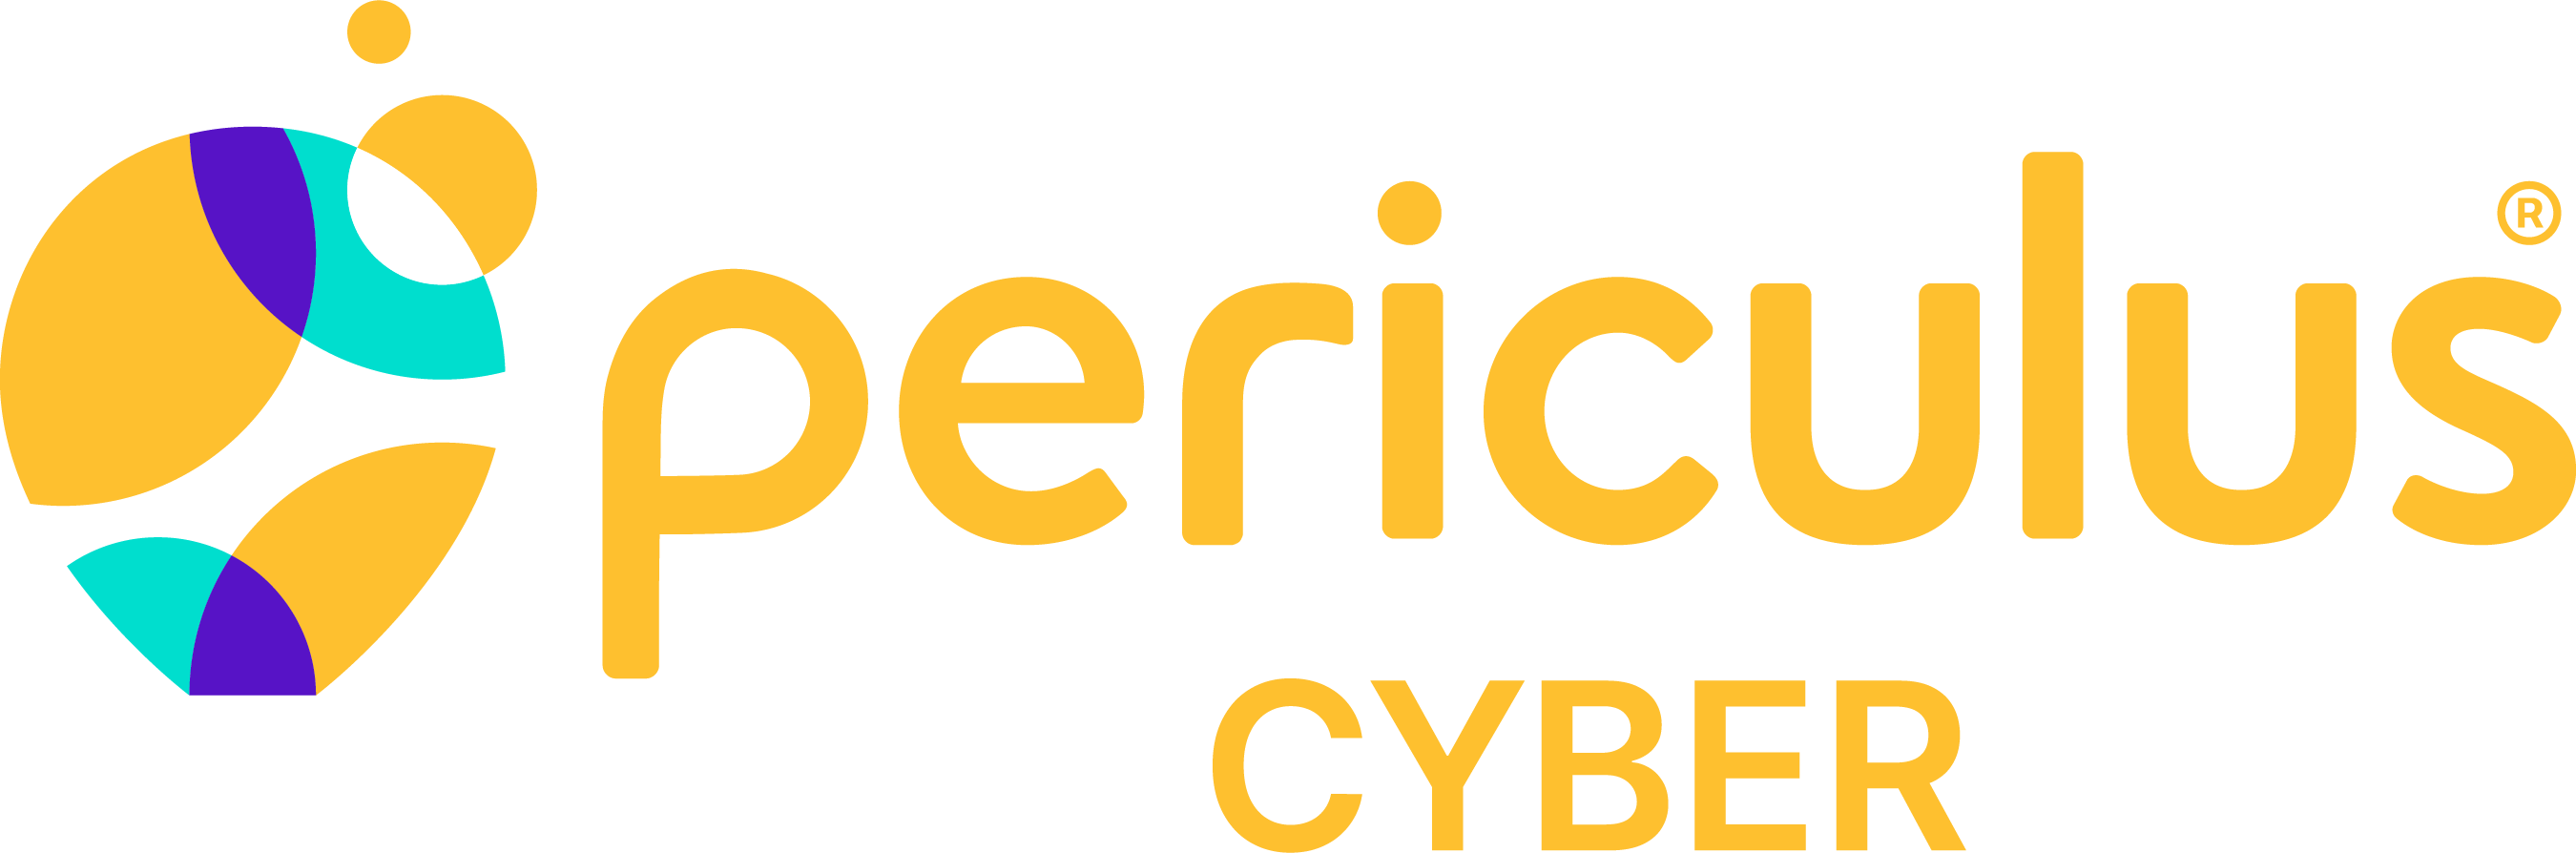 periculus-cyber